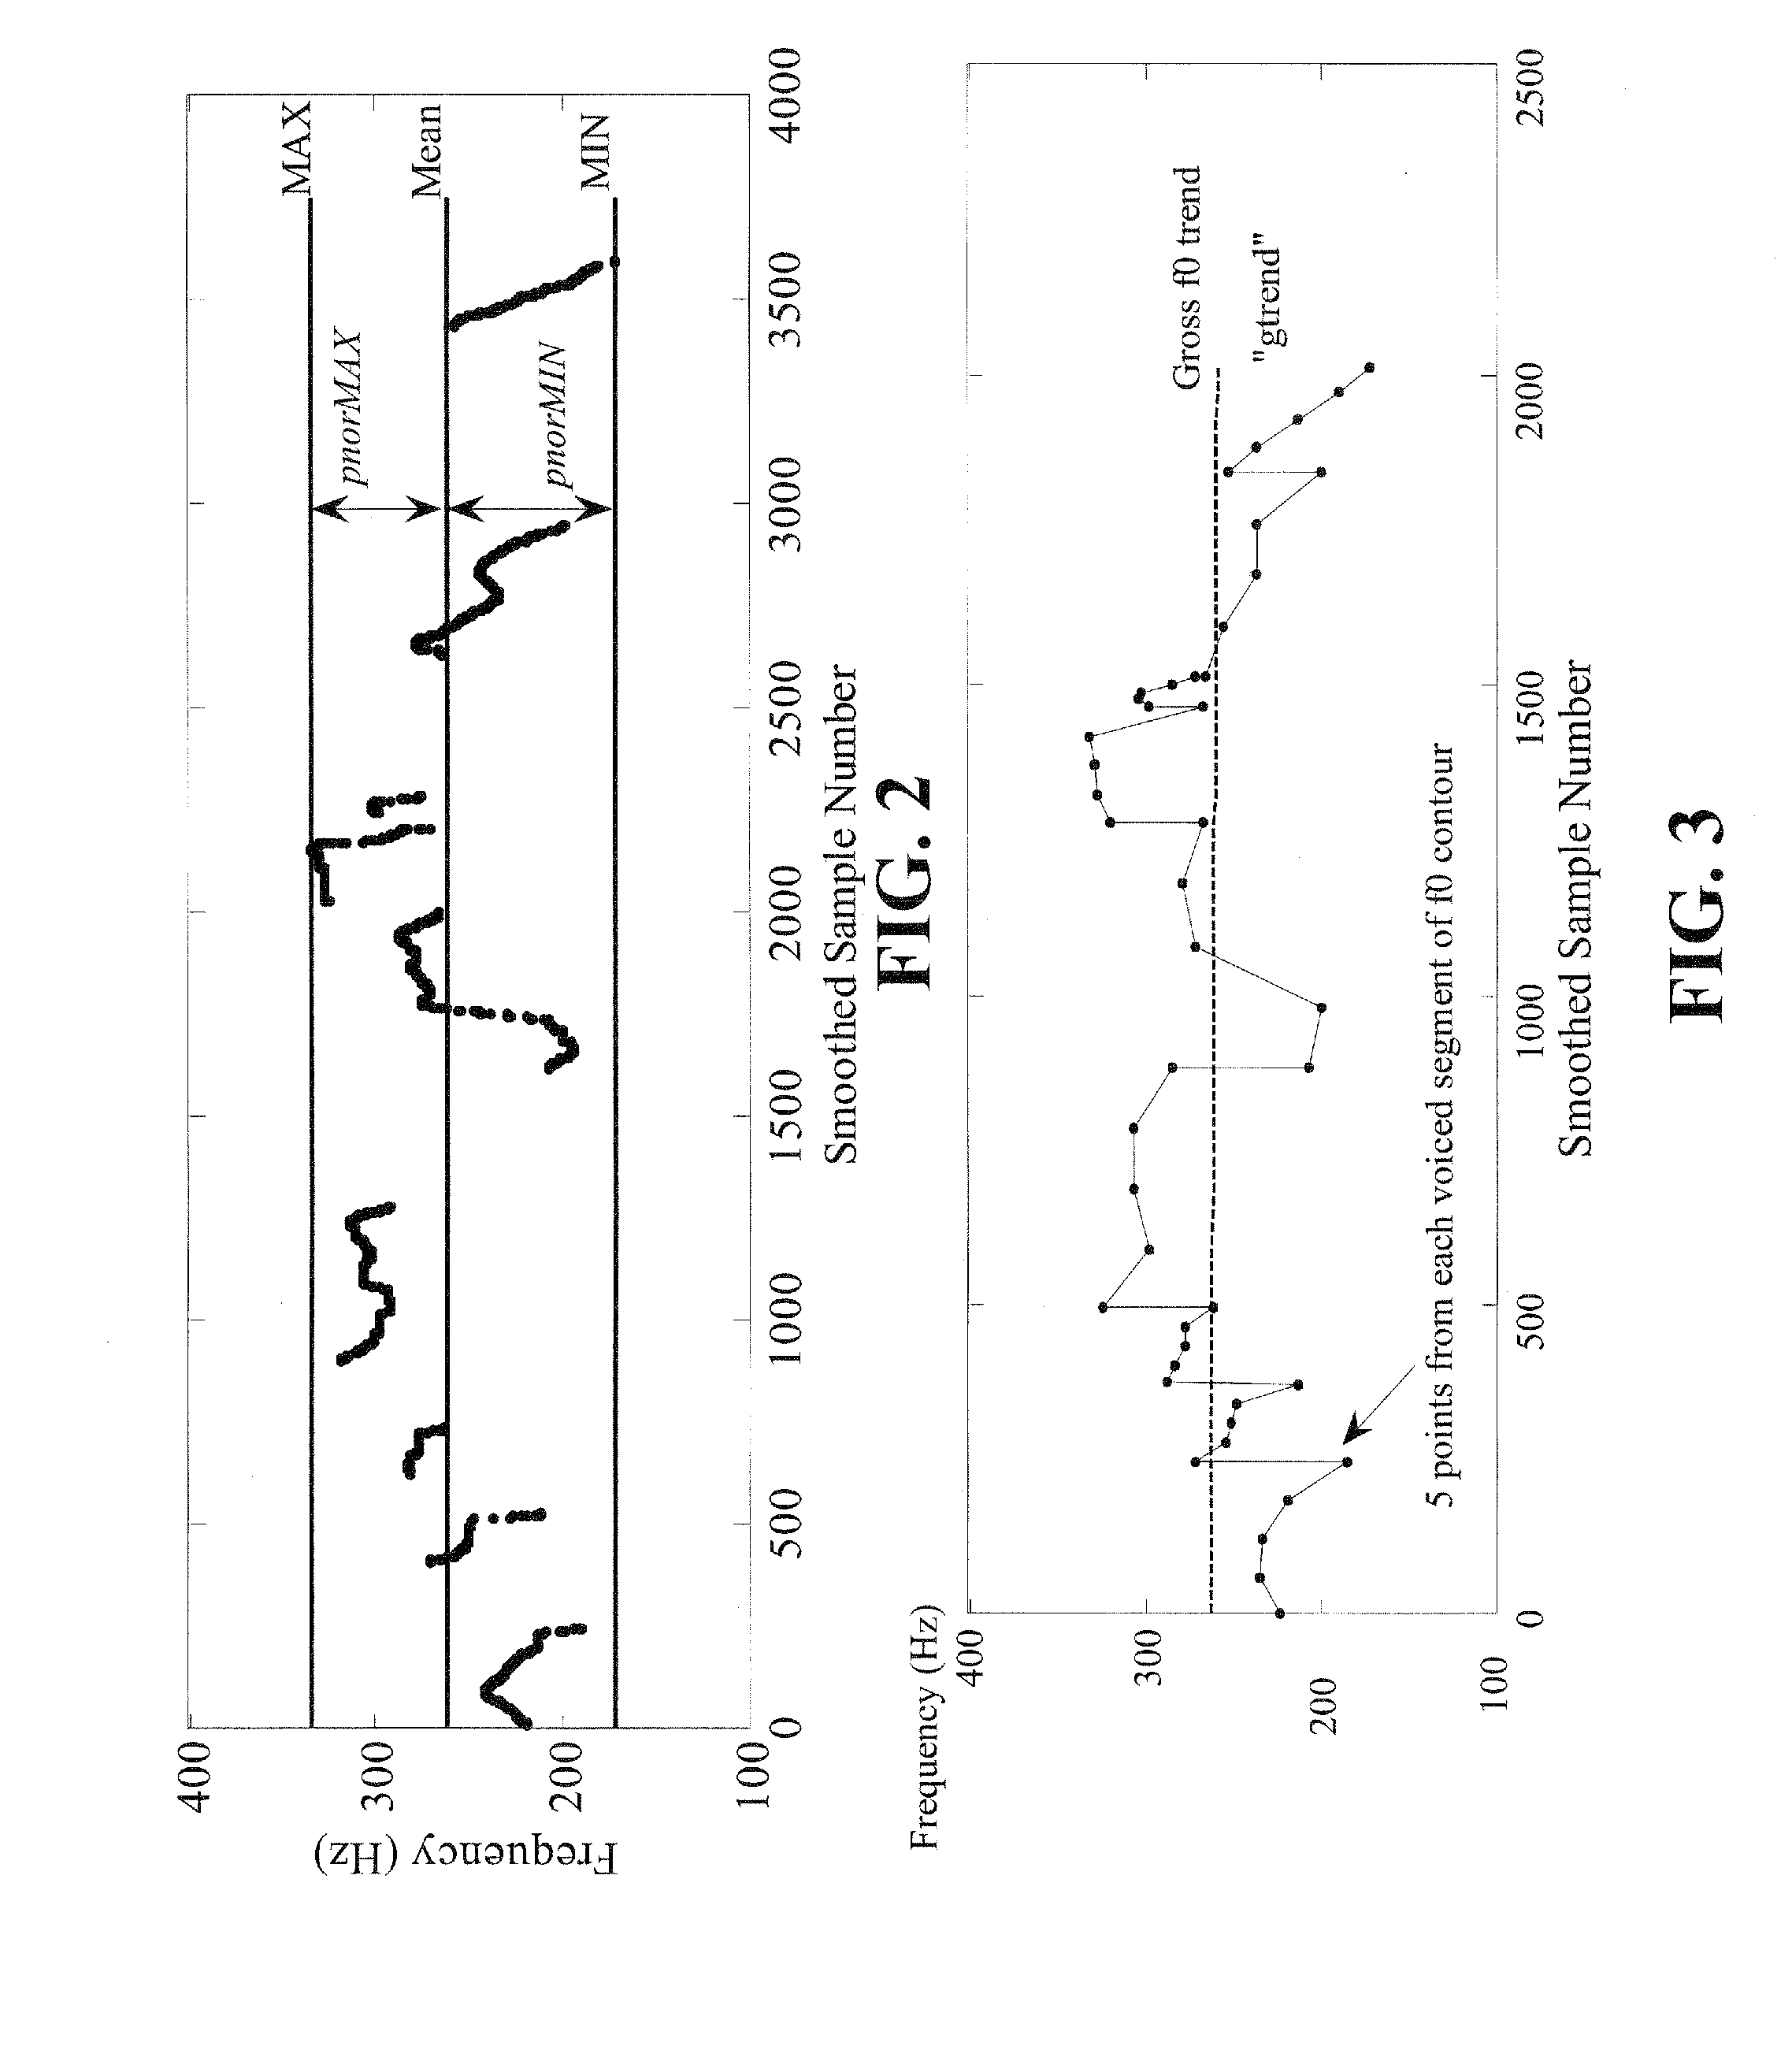 Apparatus and method for speech analysis